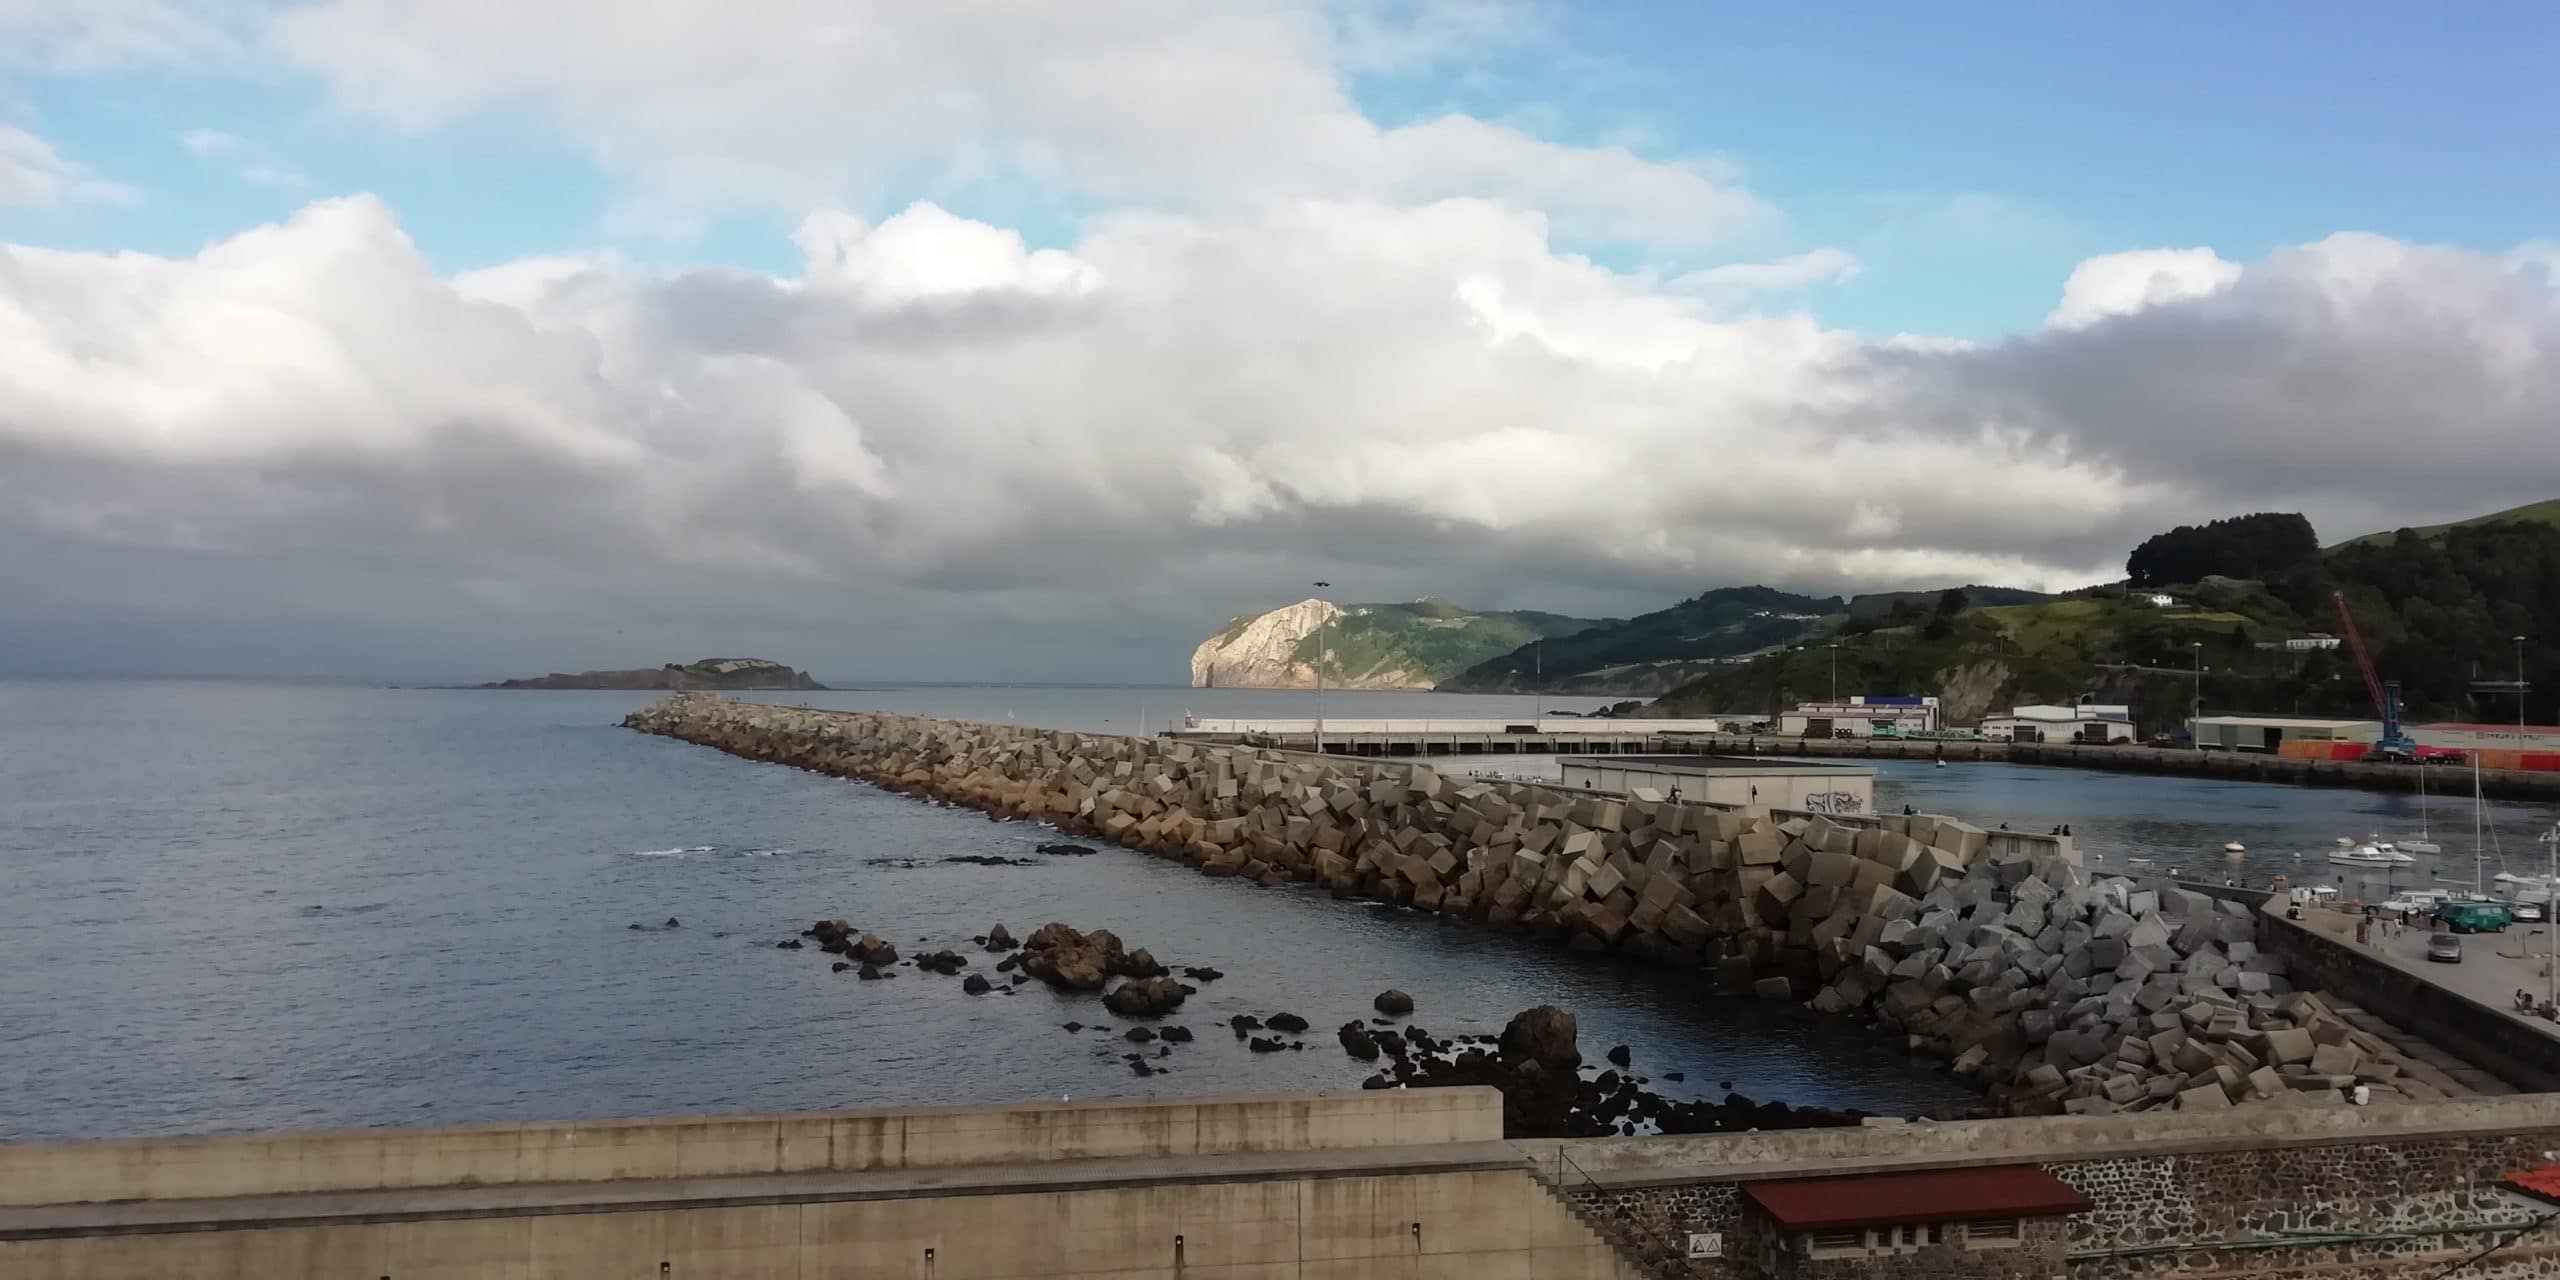 Things to see and do in Bermeo